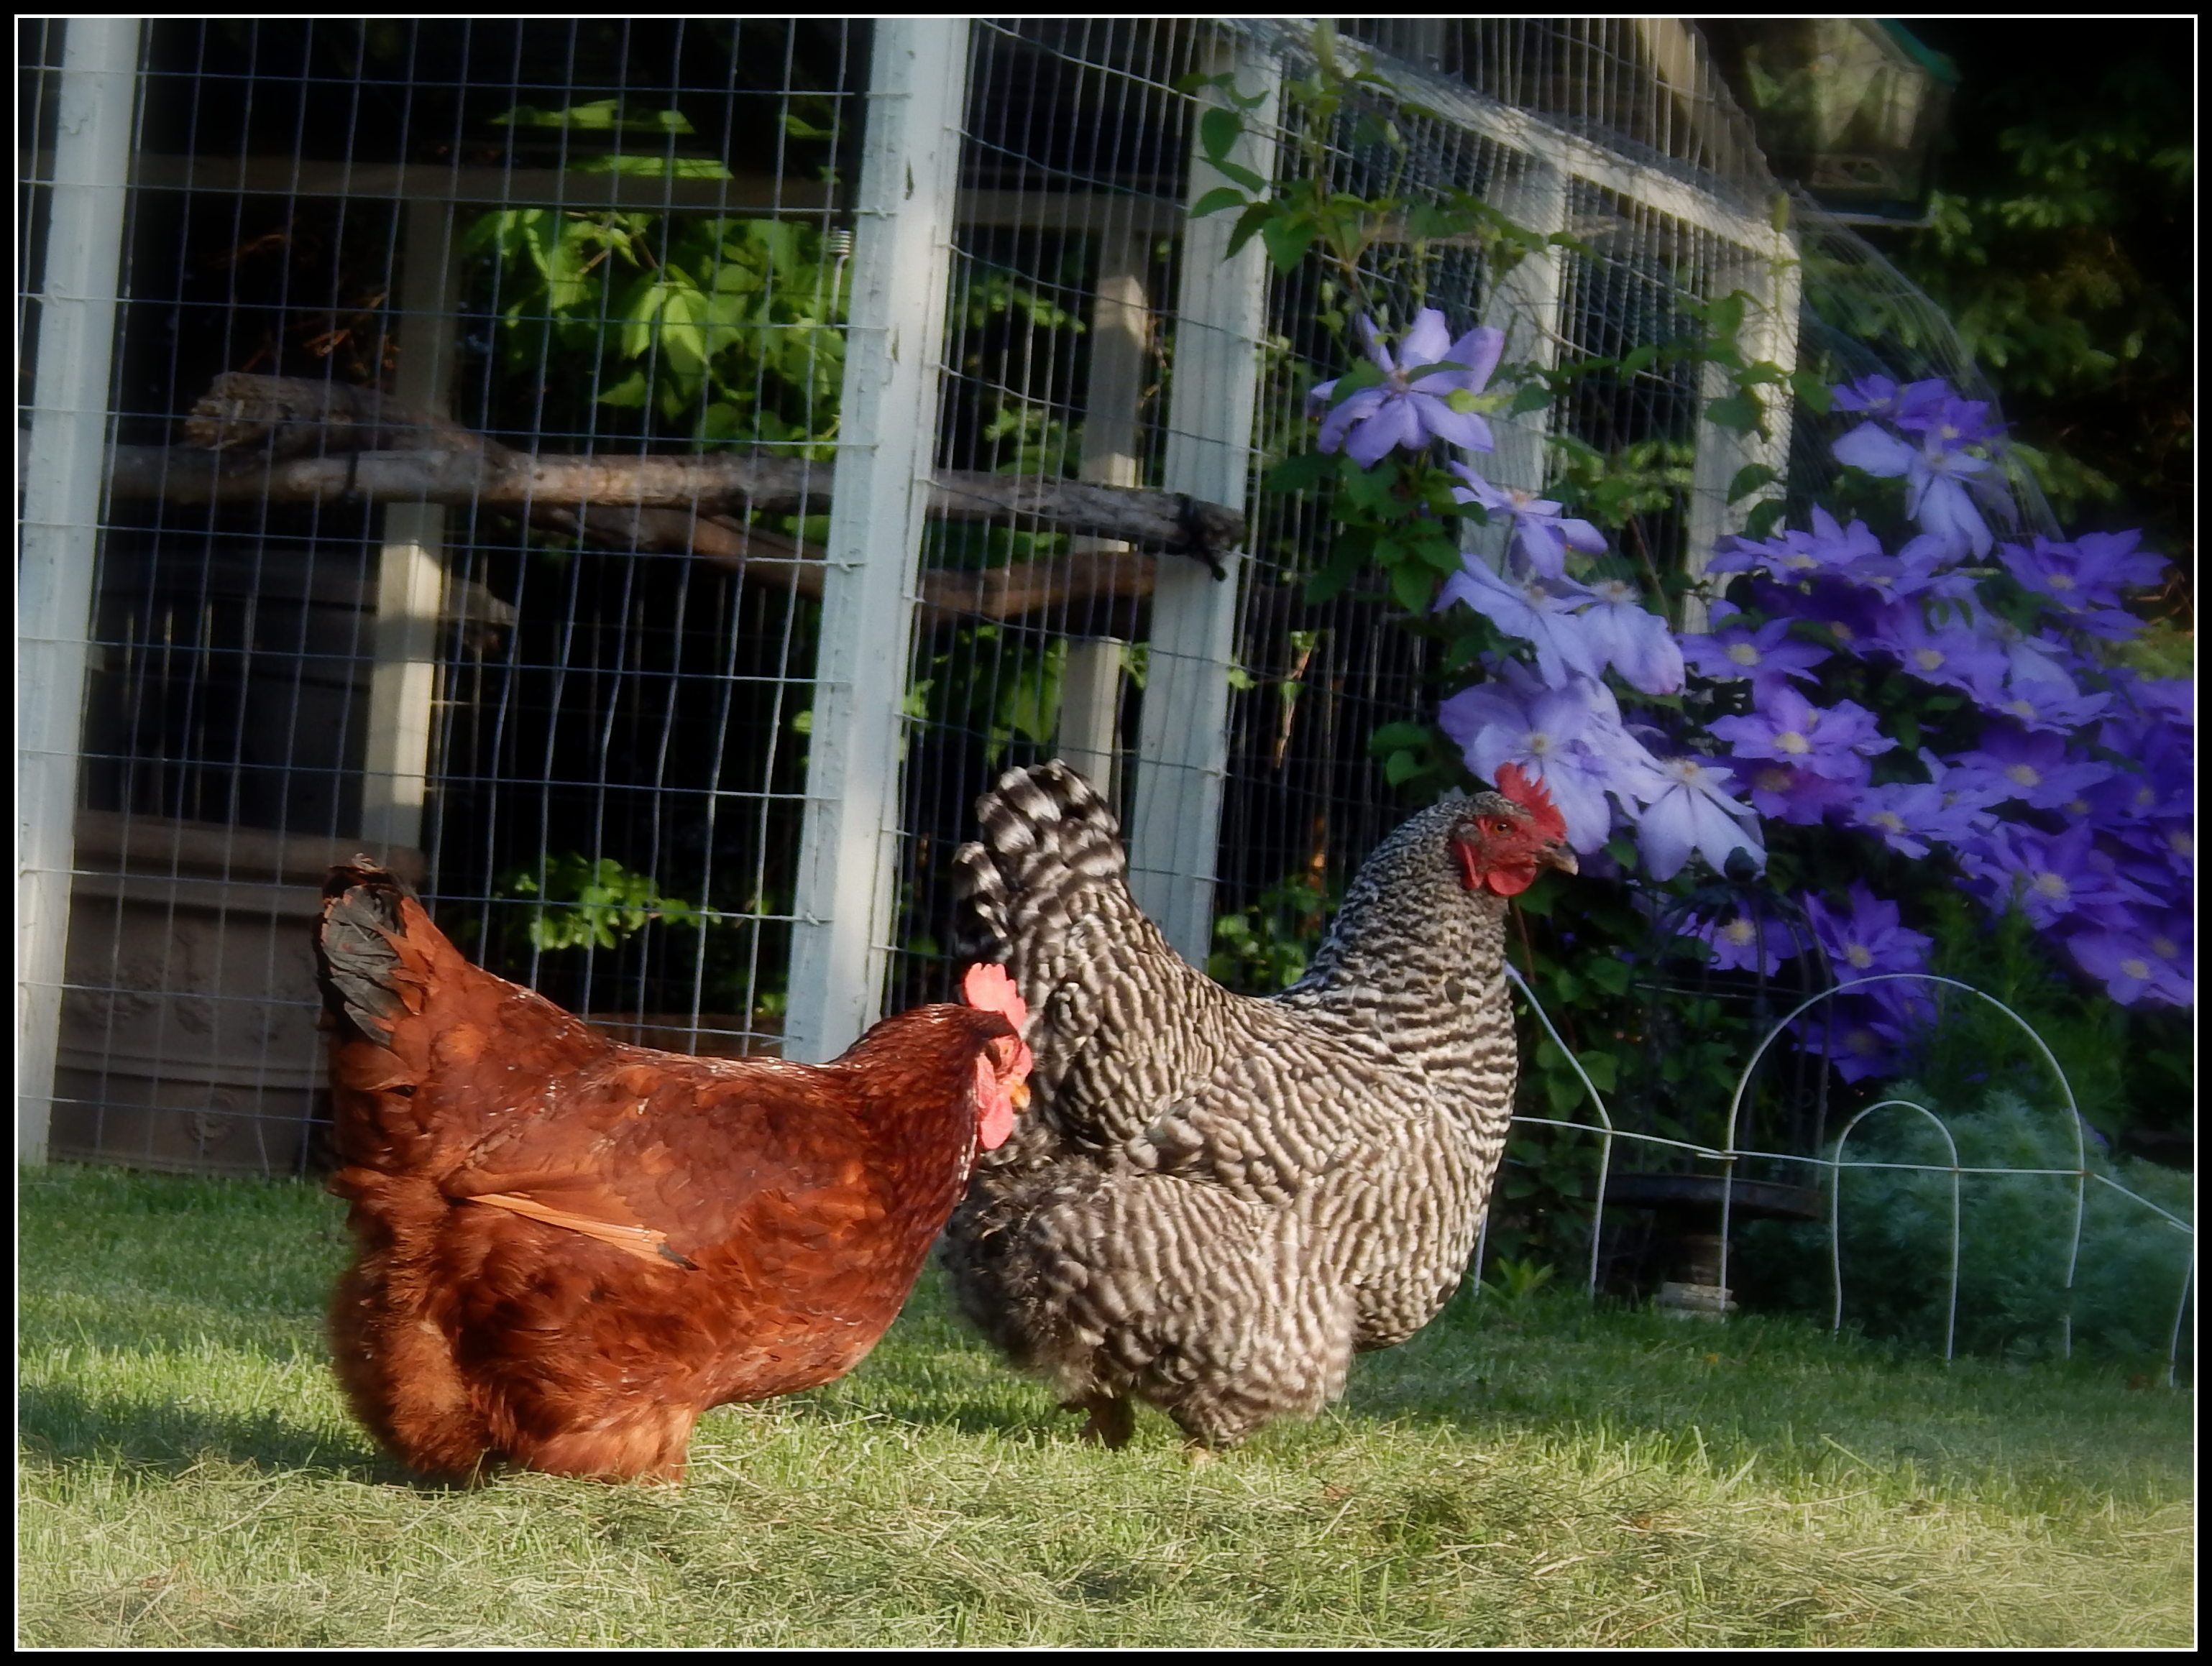 The older hens out by their coop. They are 2-3 years old, we got them as l-2 year old laying hens last year.